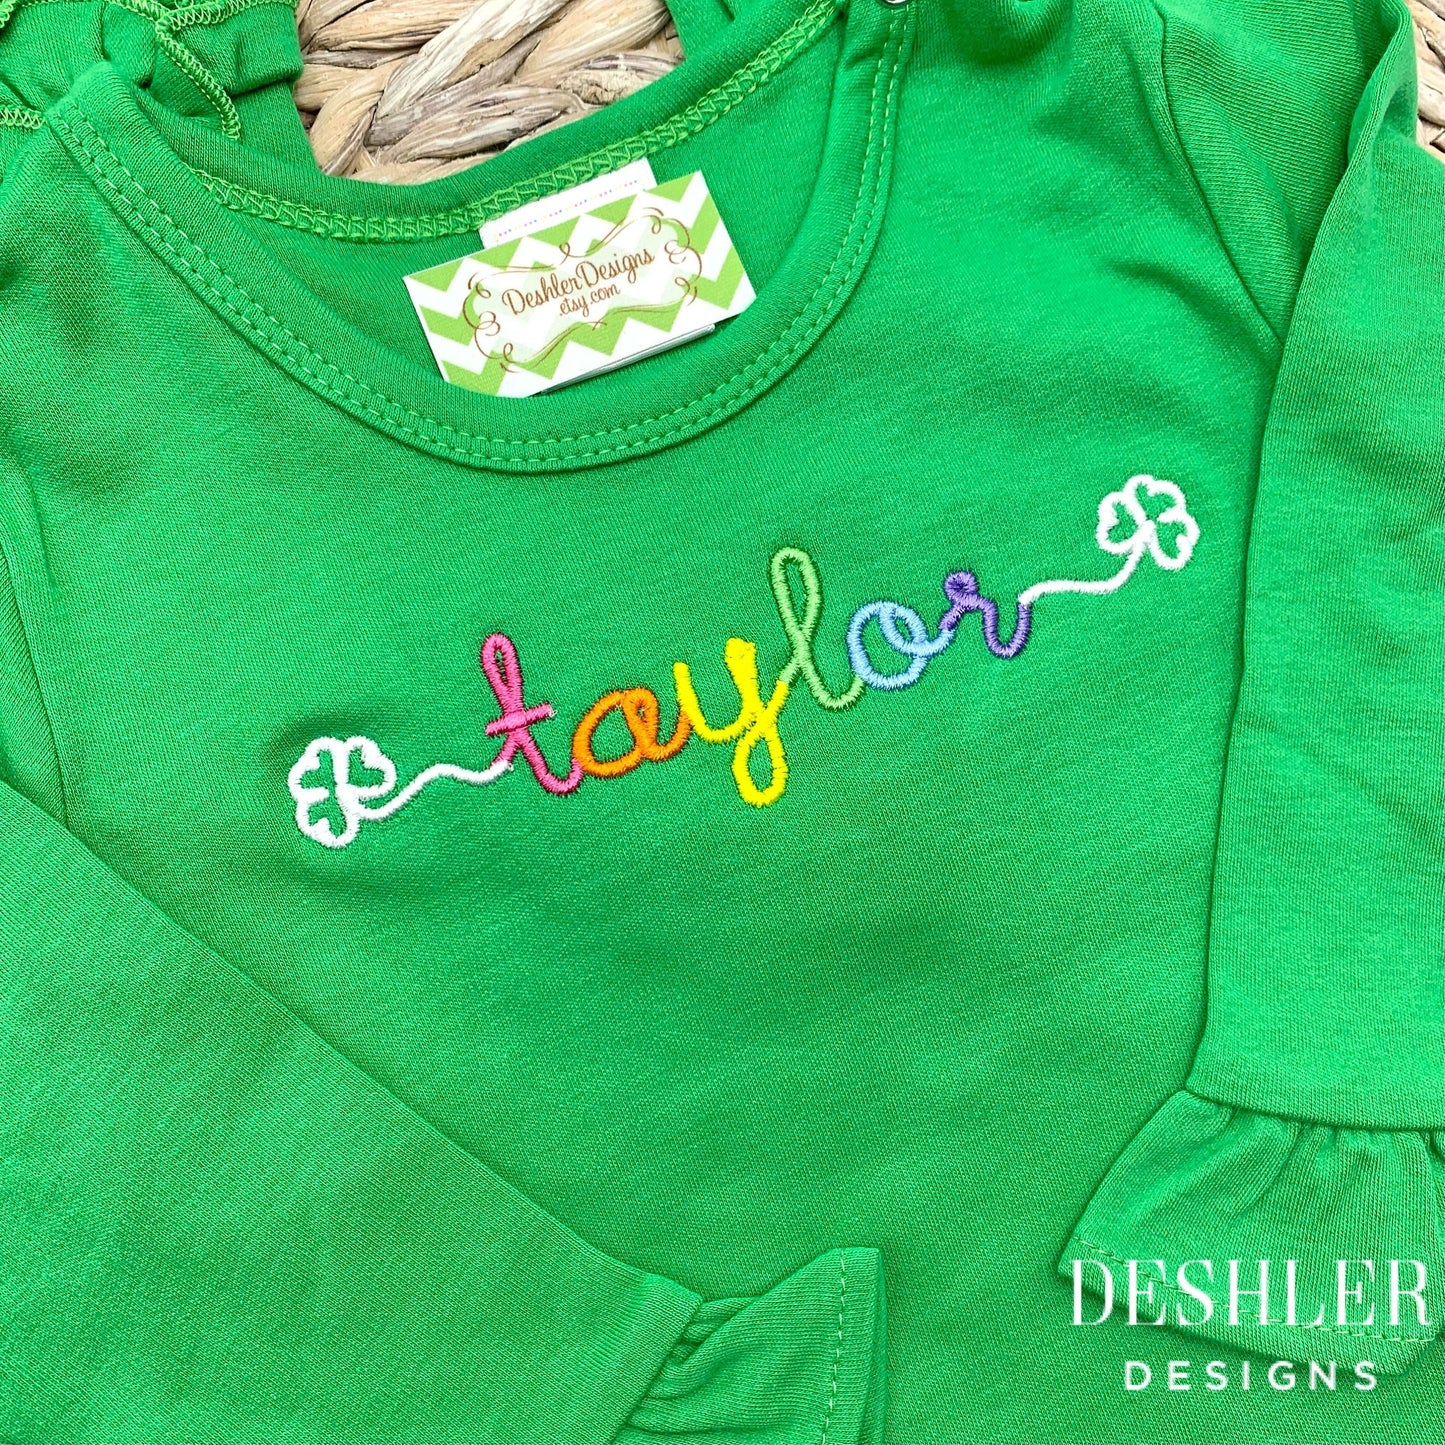 St. Patrick's Day Monogrammed Ruffle Rompers